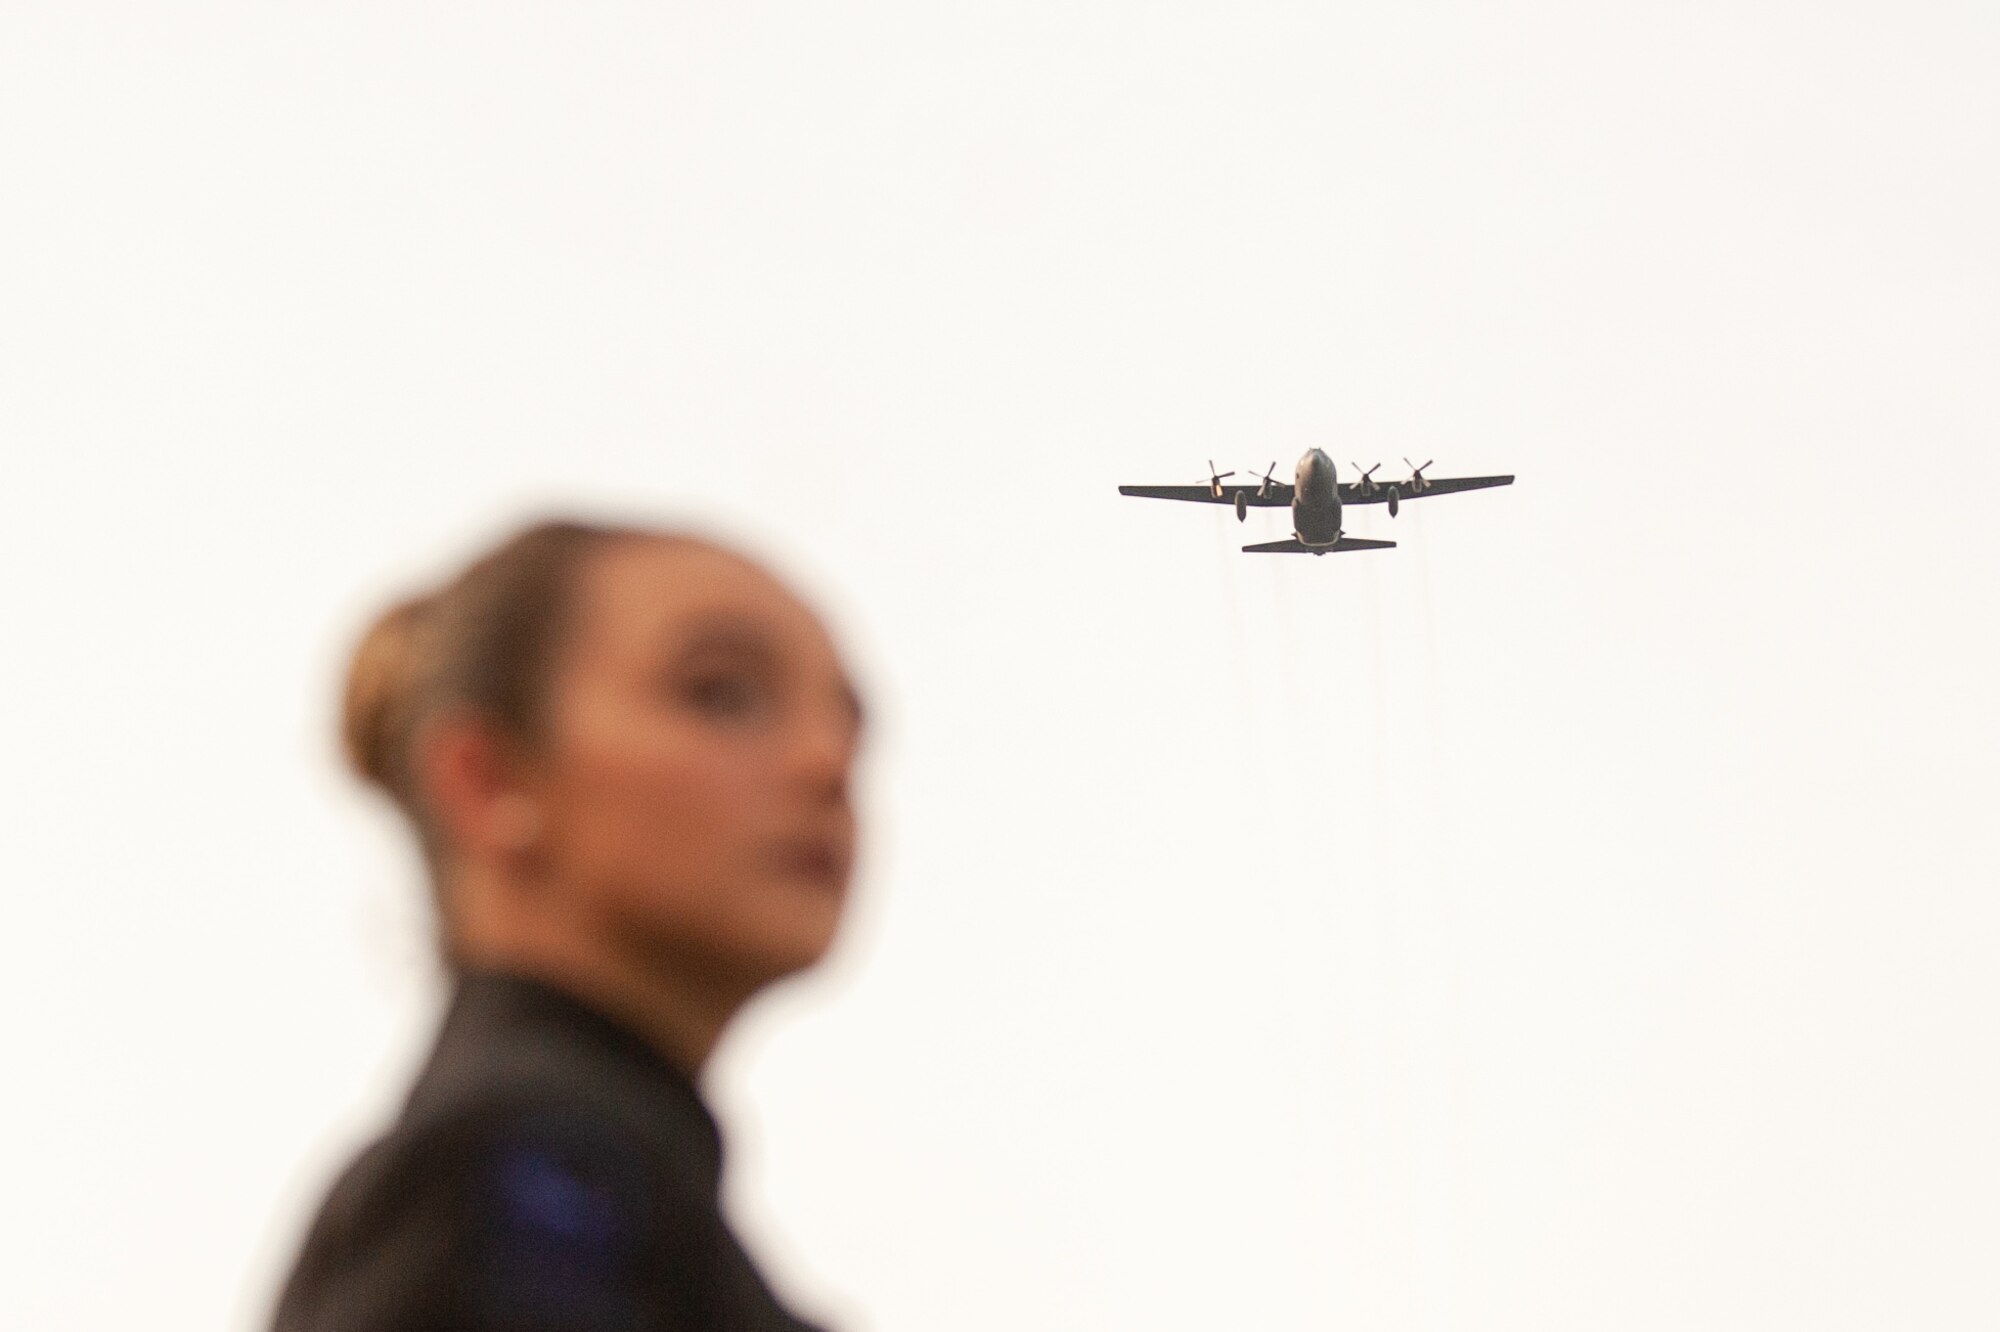 woman looks on as a c-130 approaches